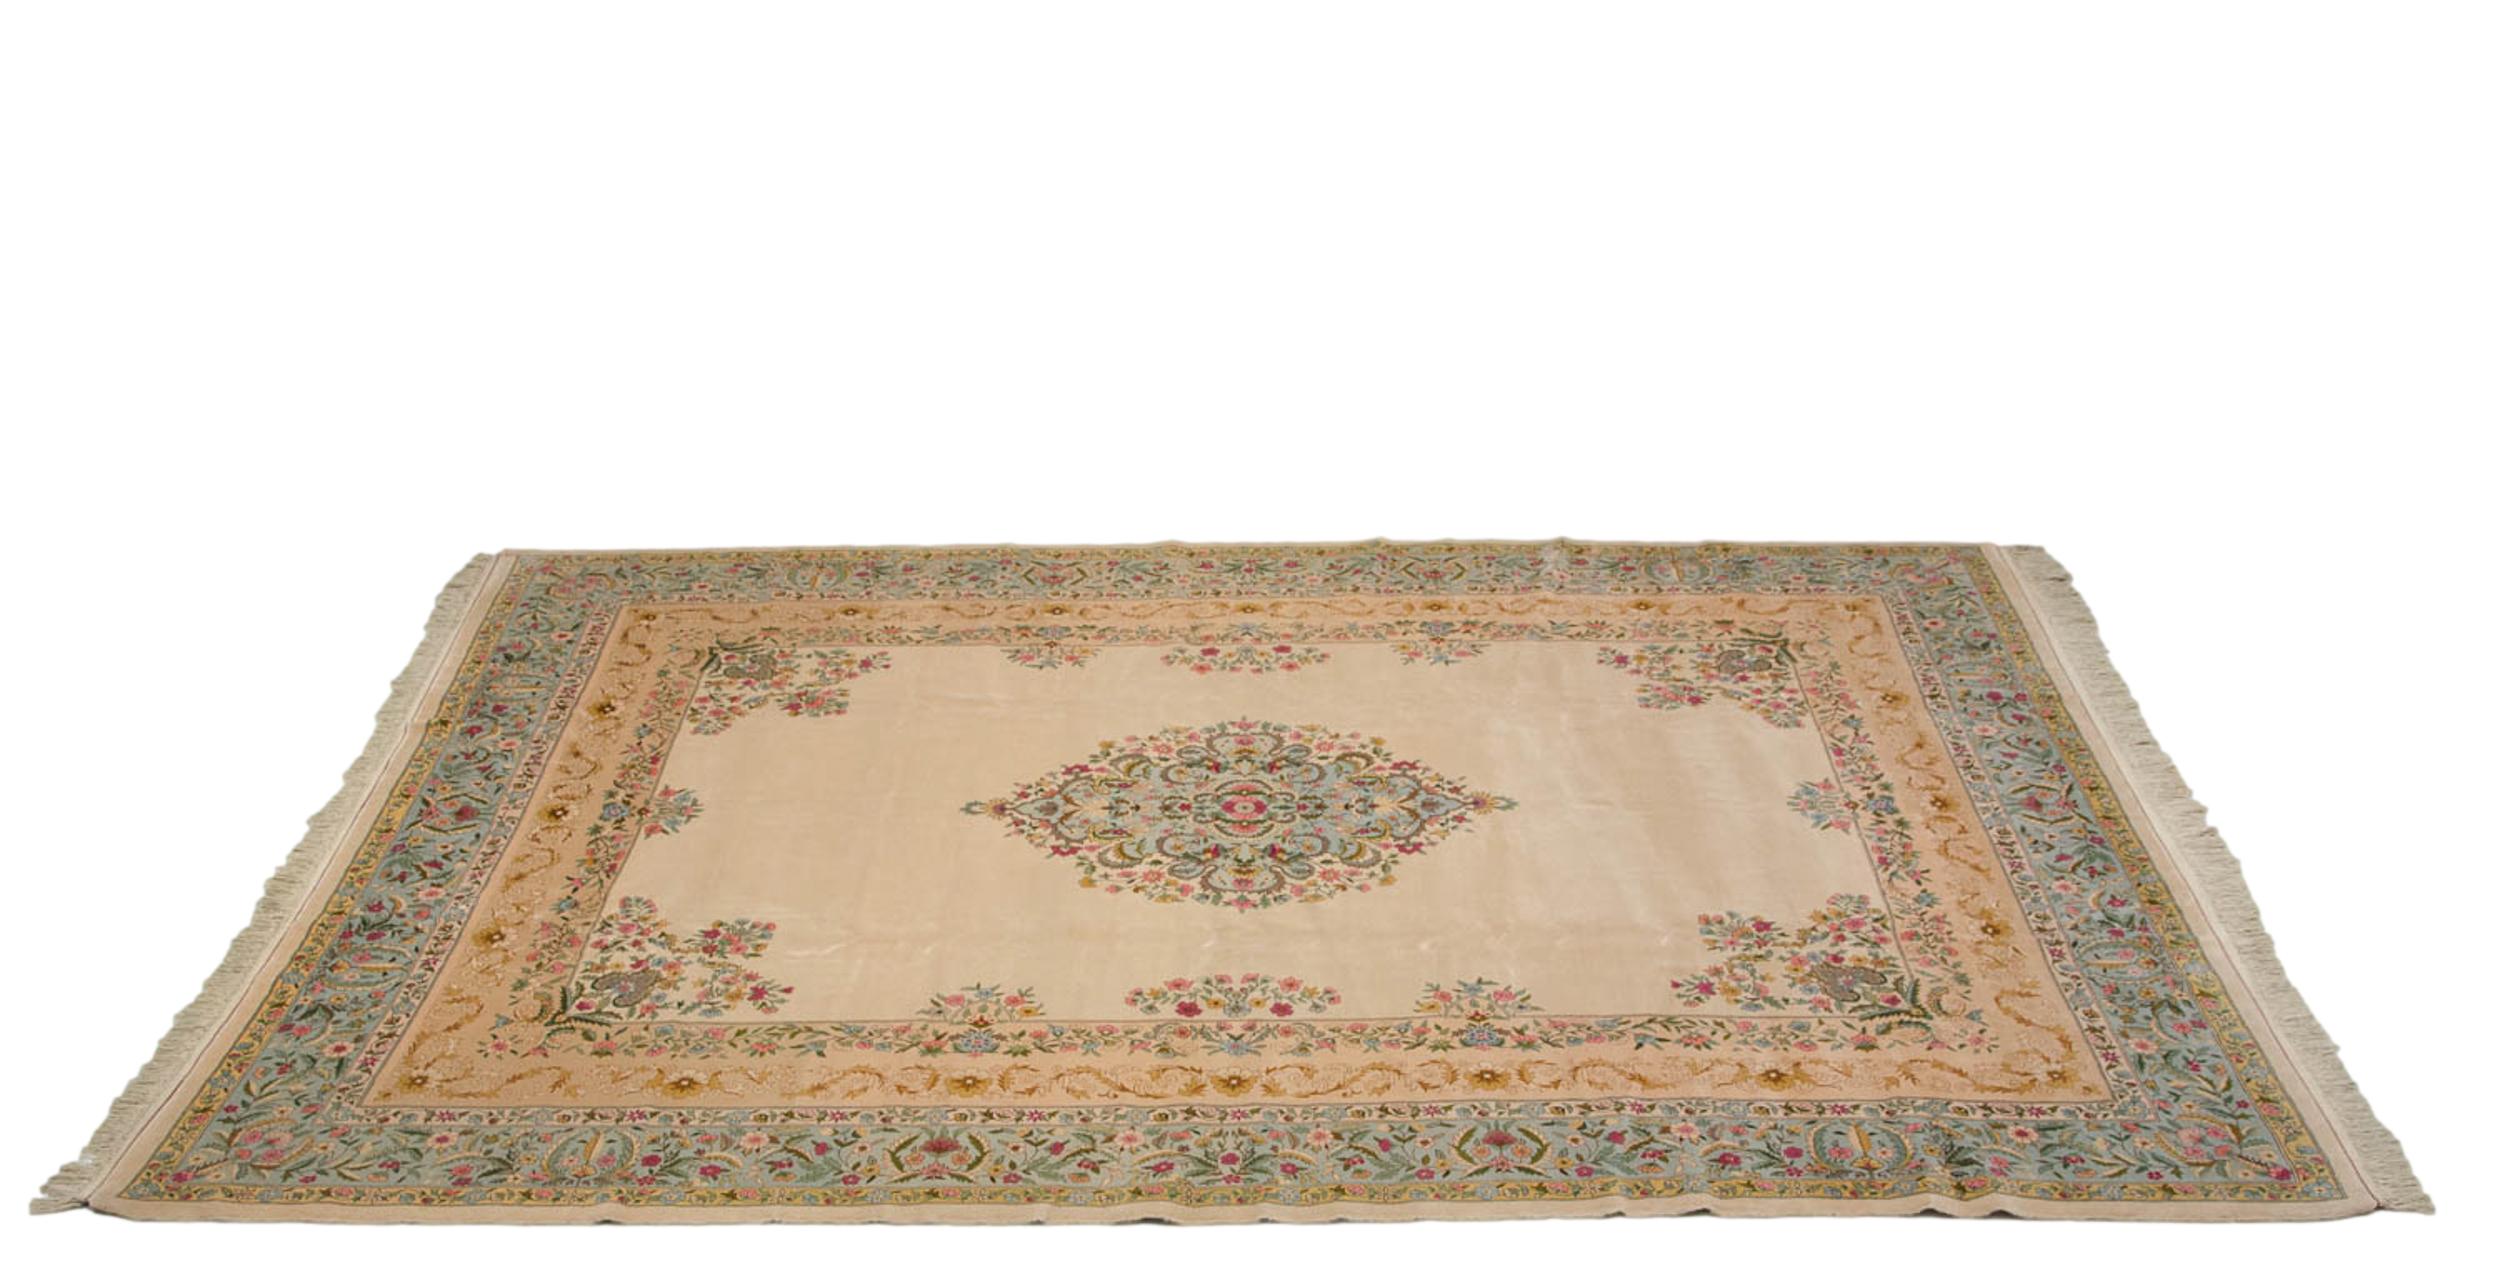 Vintage Fine Bulgarian Kerman Design Carpet In Excellent Condition For Sale In Katonah, NY